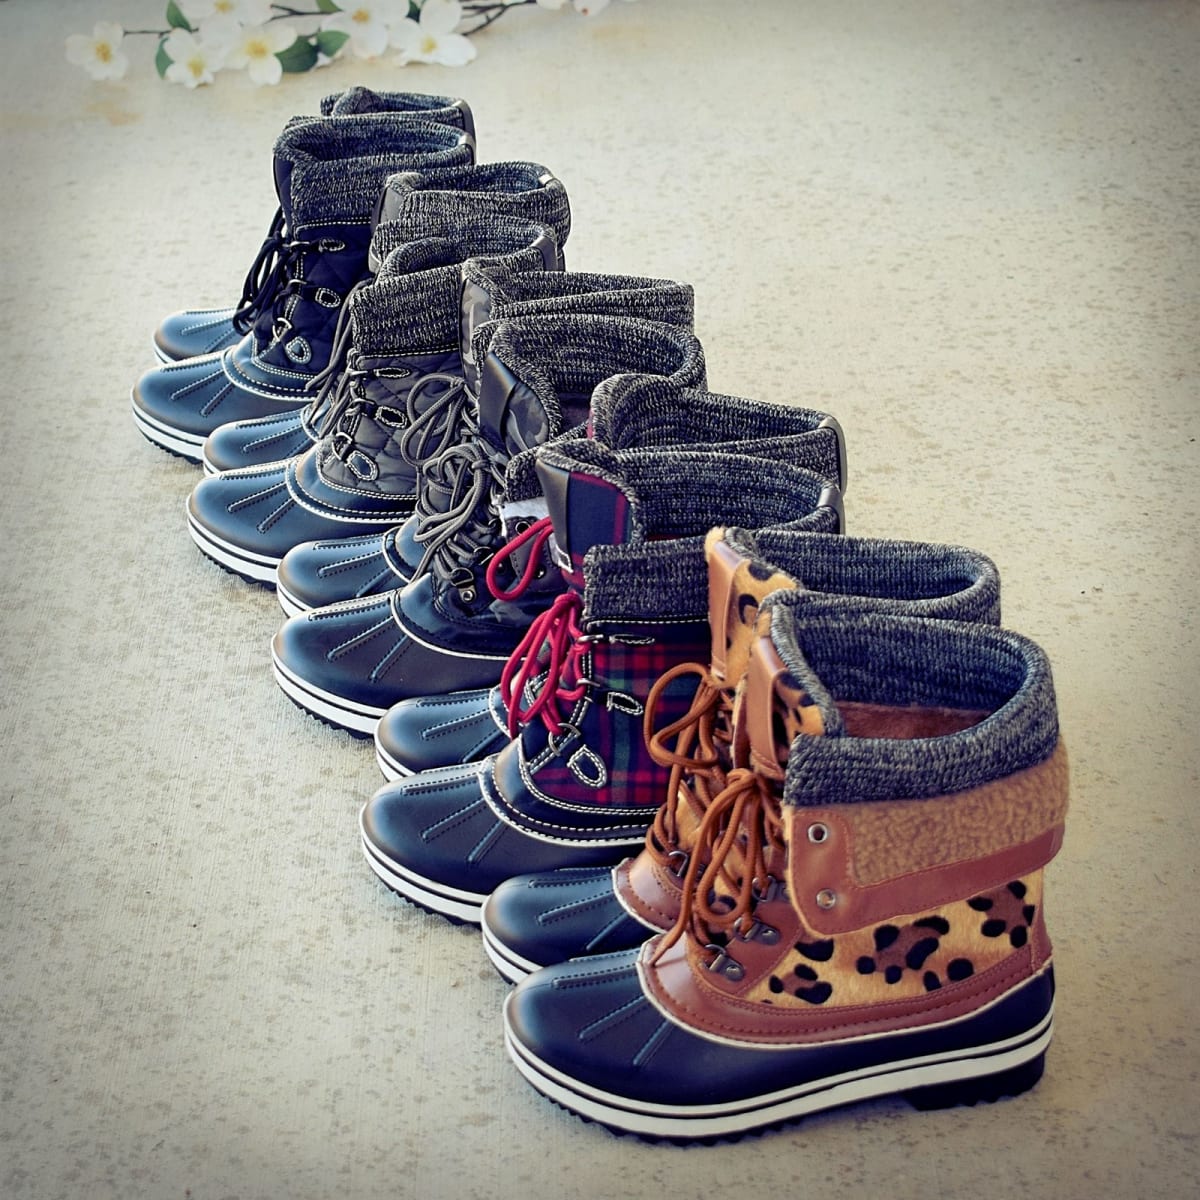 Knit Top Duck Boots – Only $36.99!